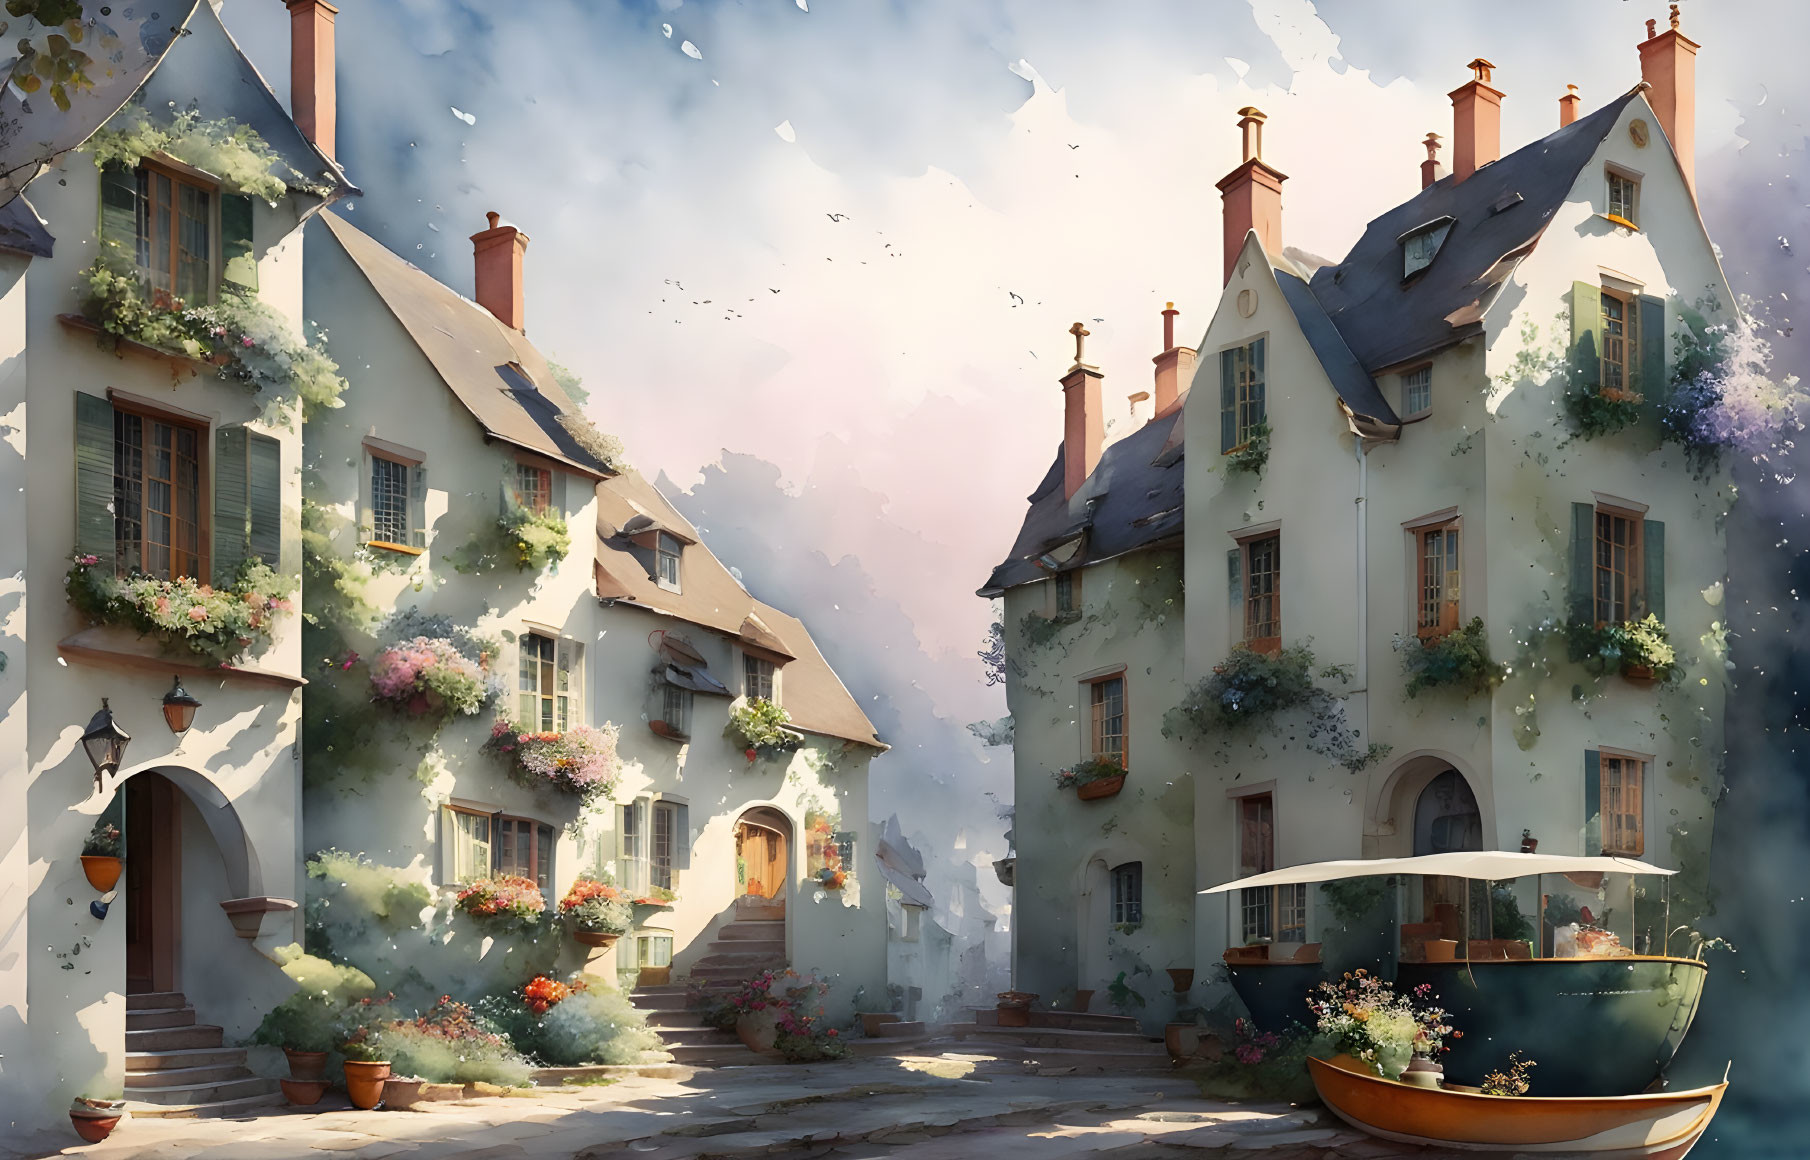 Charming village street with flower-adorned houses under a bright sky